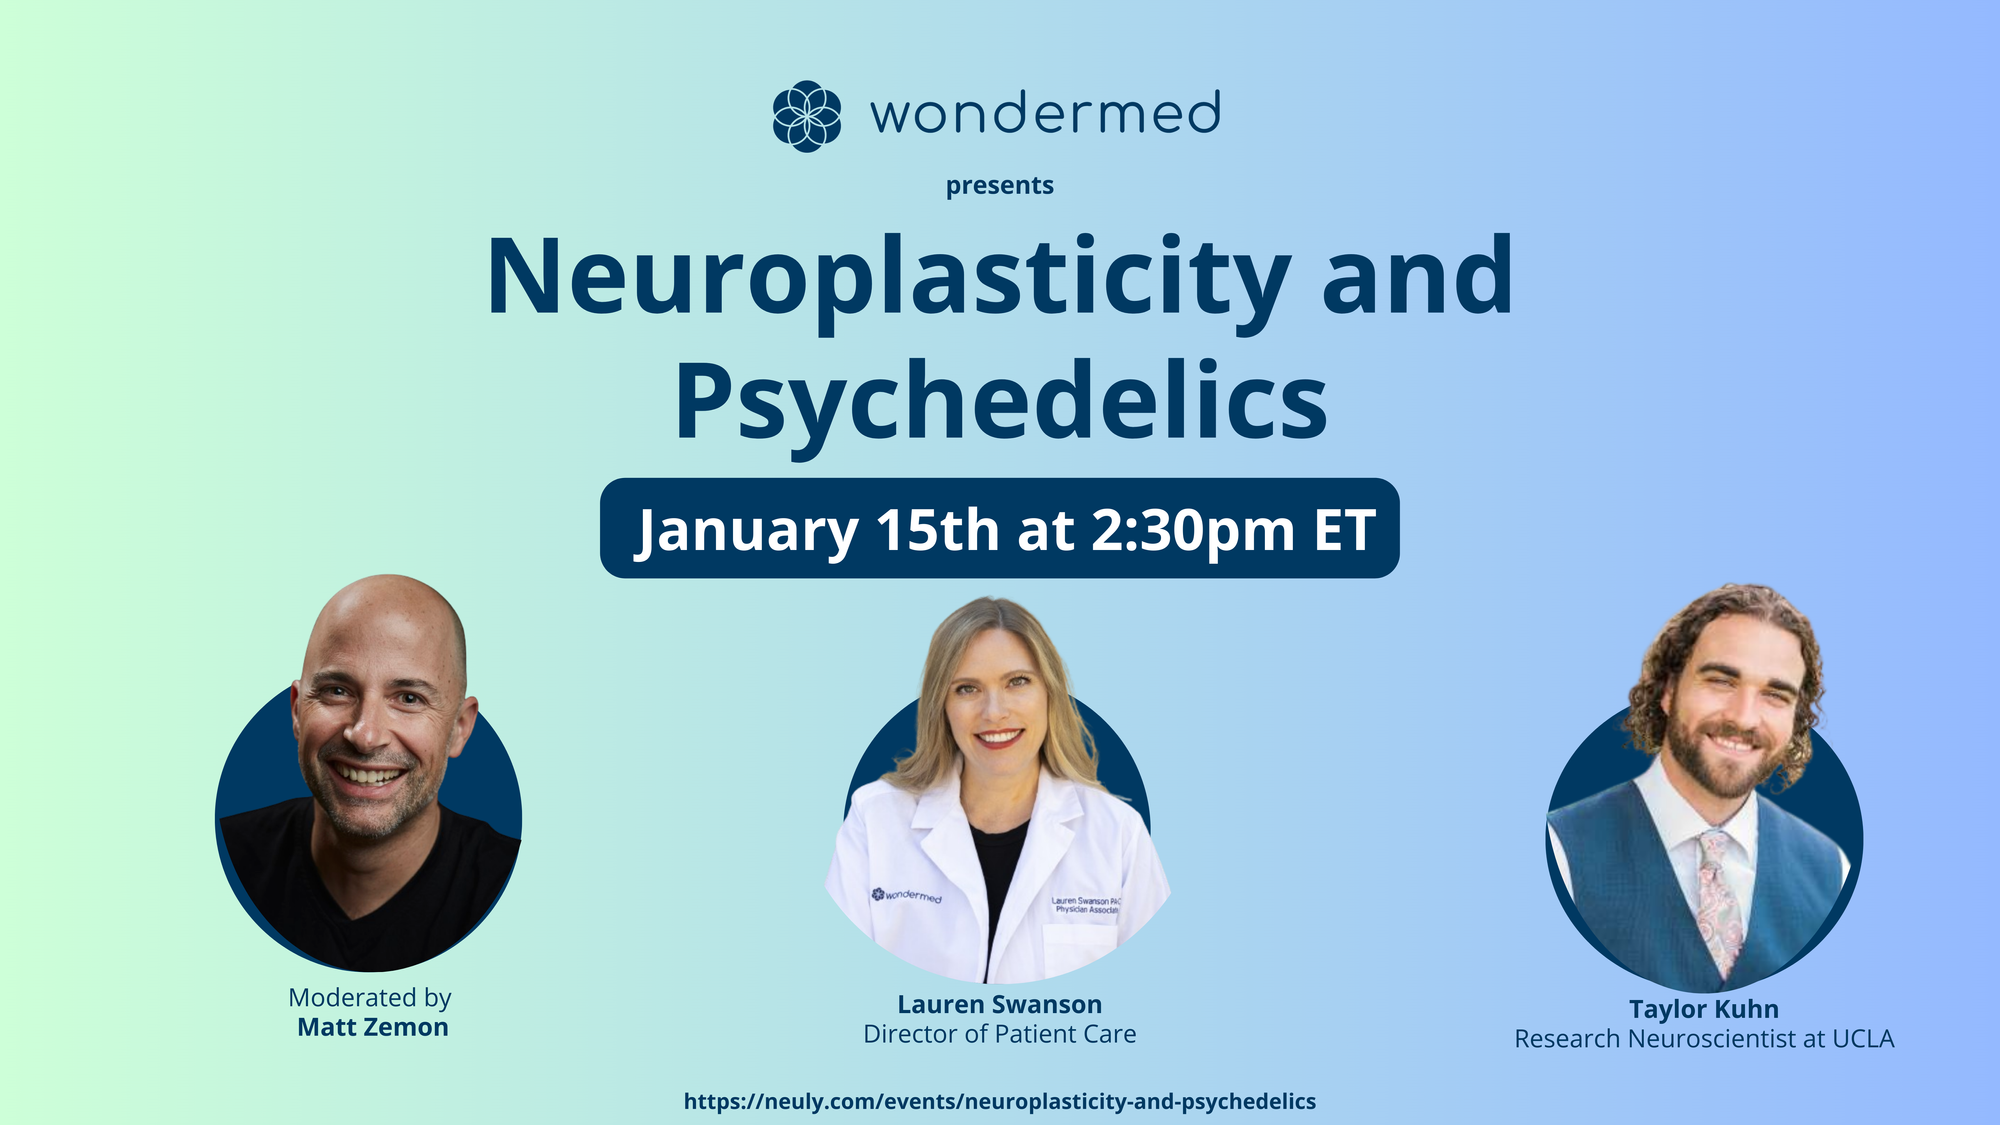 Wondermed and Neuly webinar on neuroplasticity & psychedelics with Lauren Swanson, Taylor Kuhn, and moderator Matt Zemon